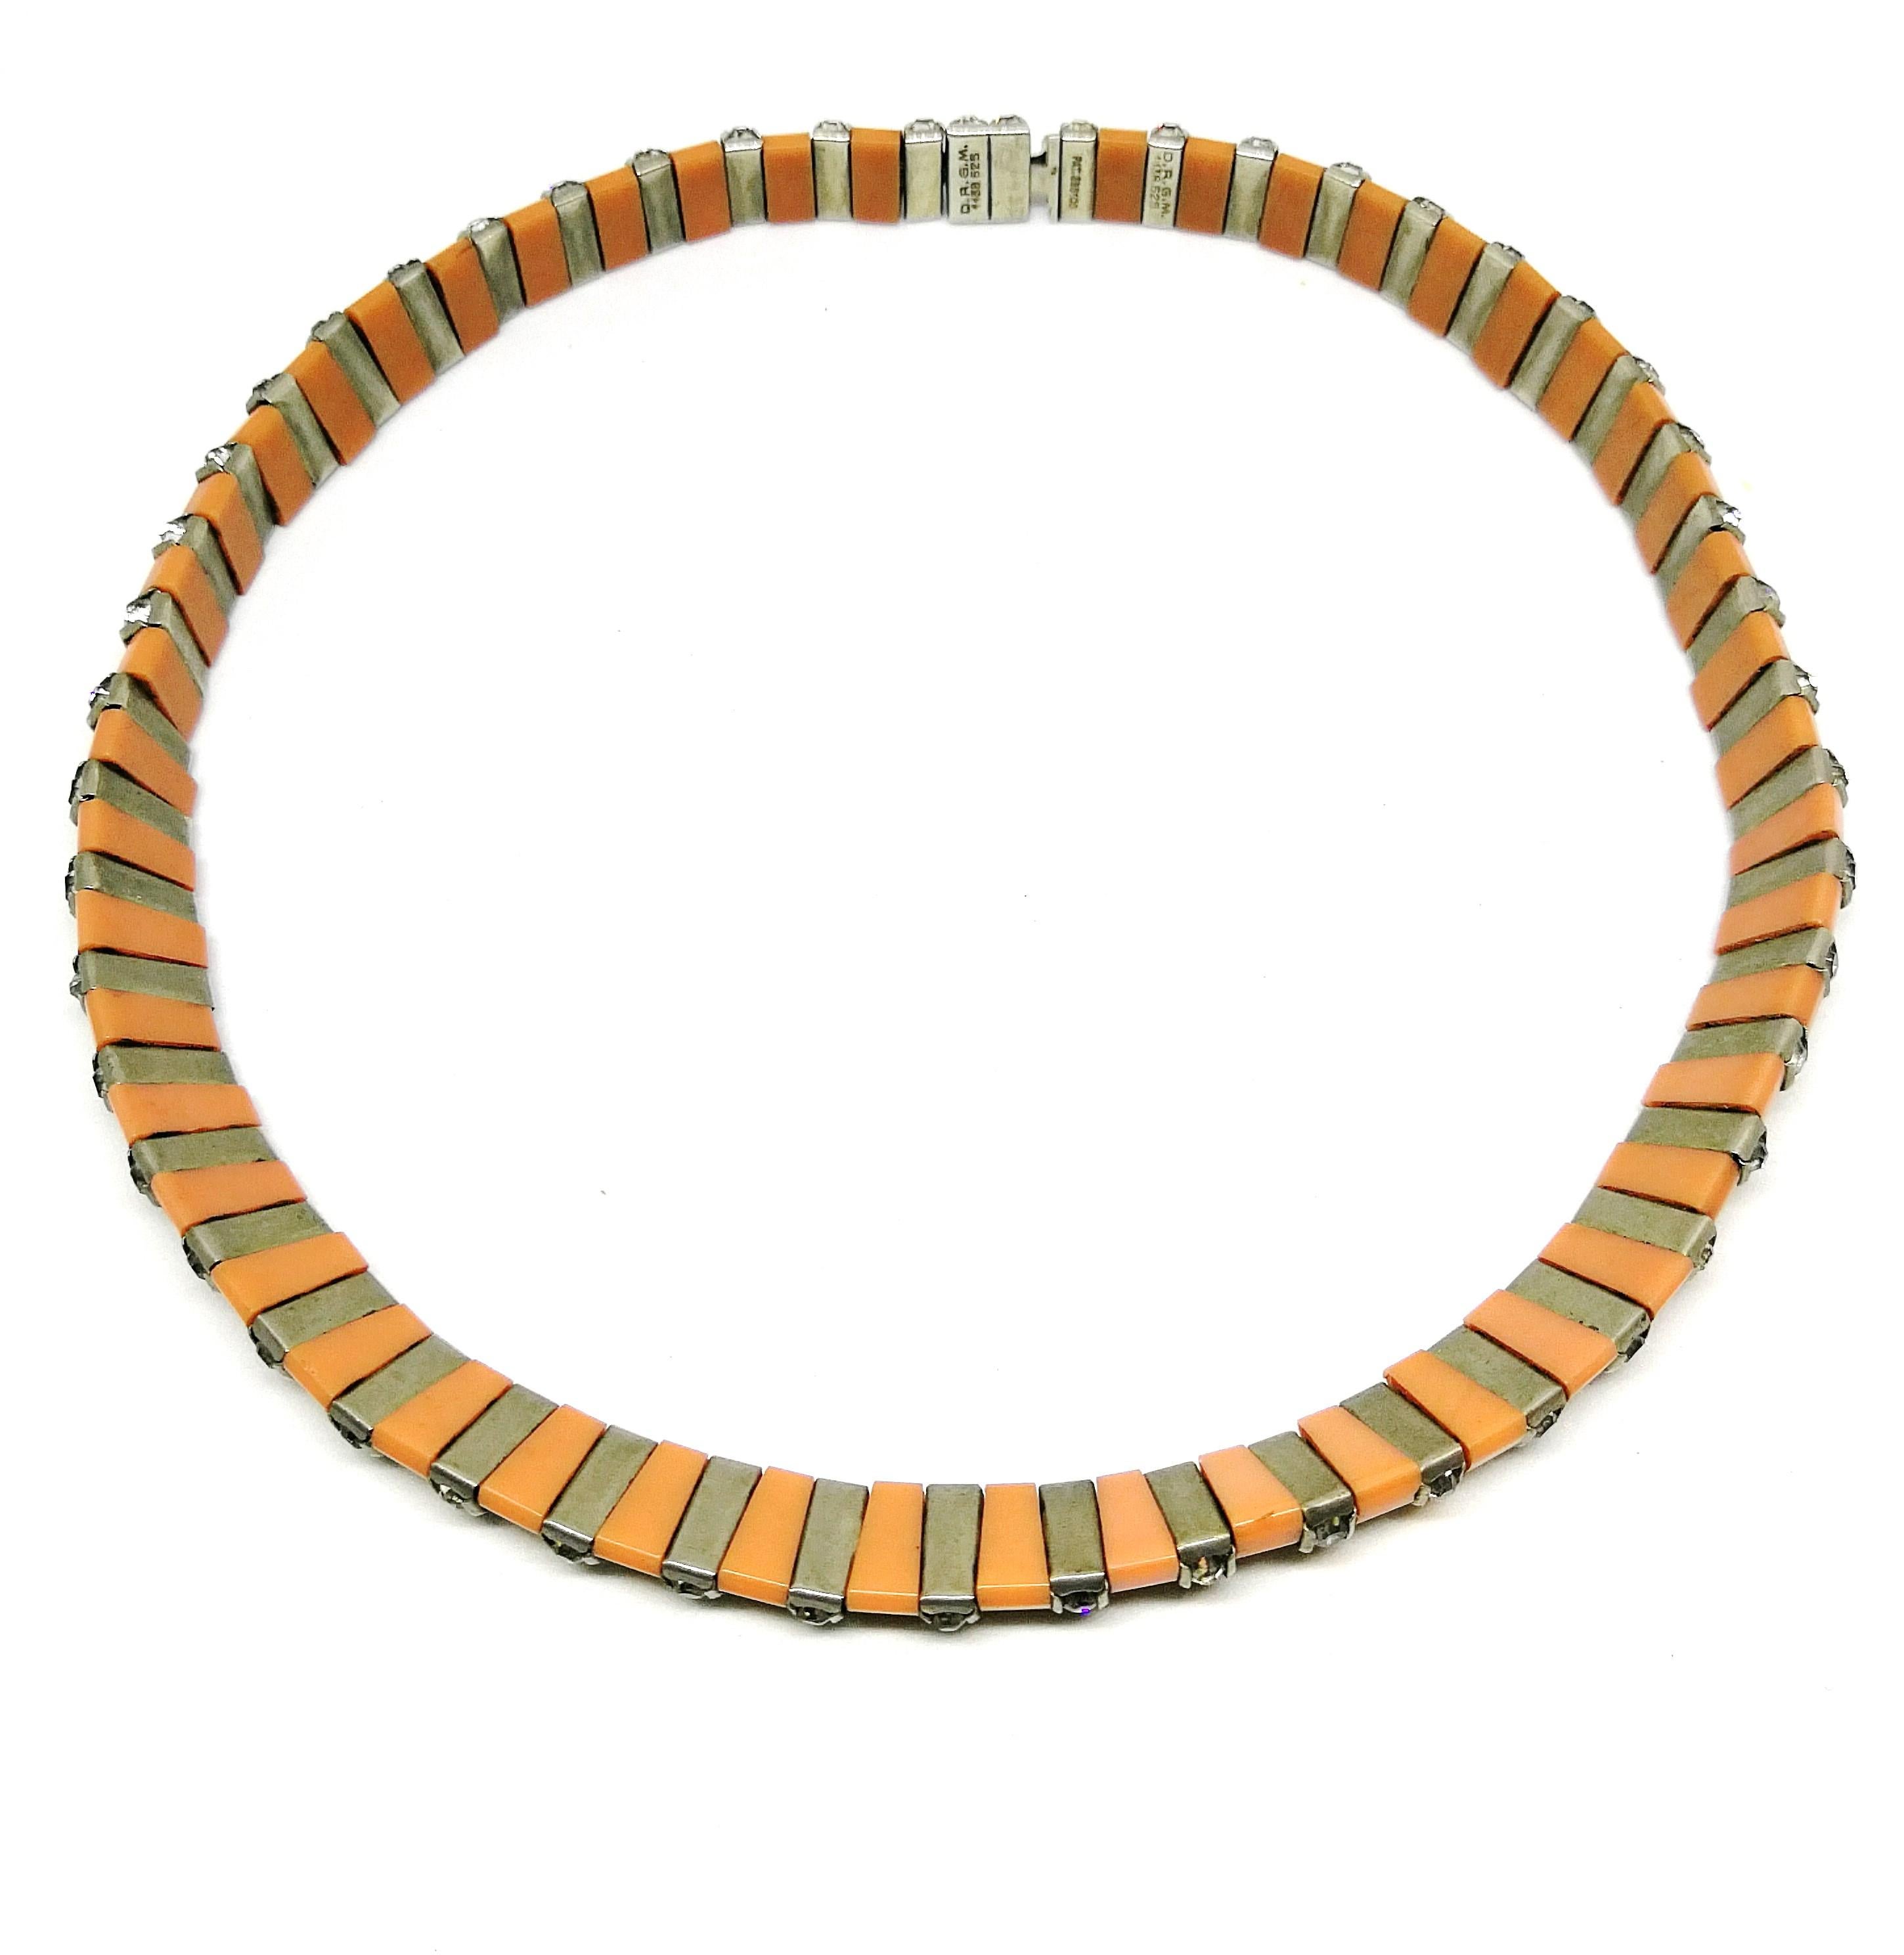 Styled in the highly characteristic manner of all D.R.G.M pieces, this particular necklace is in a very unusual hue of Bakelite. Whereas most pieces use black Bakelite, this elegant and simple necklace is made in a soft salmon pink, interspersed